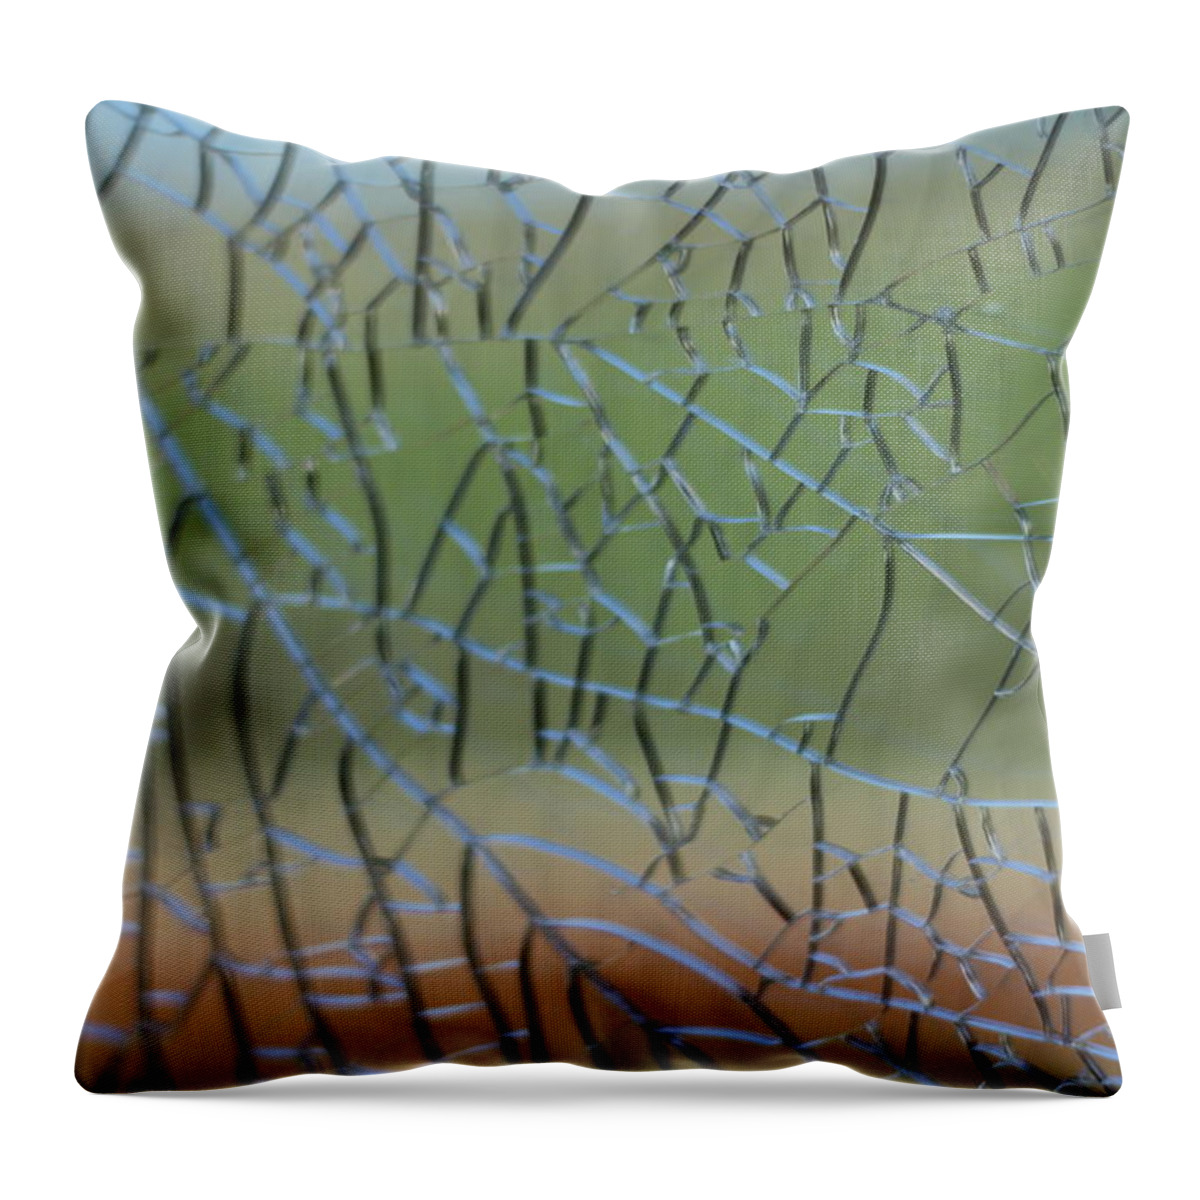 Glass Throw Pillow featuring the photograph Shattered by Amber Kresge